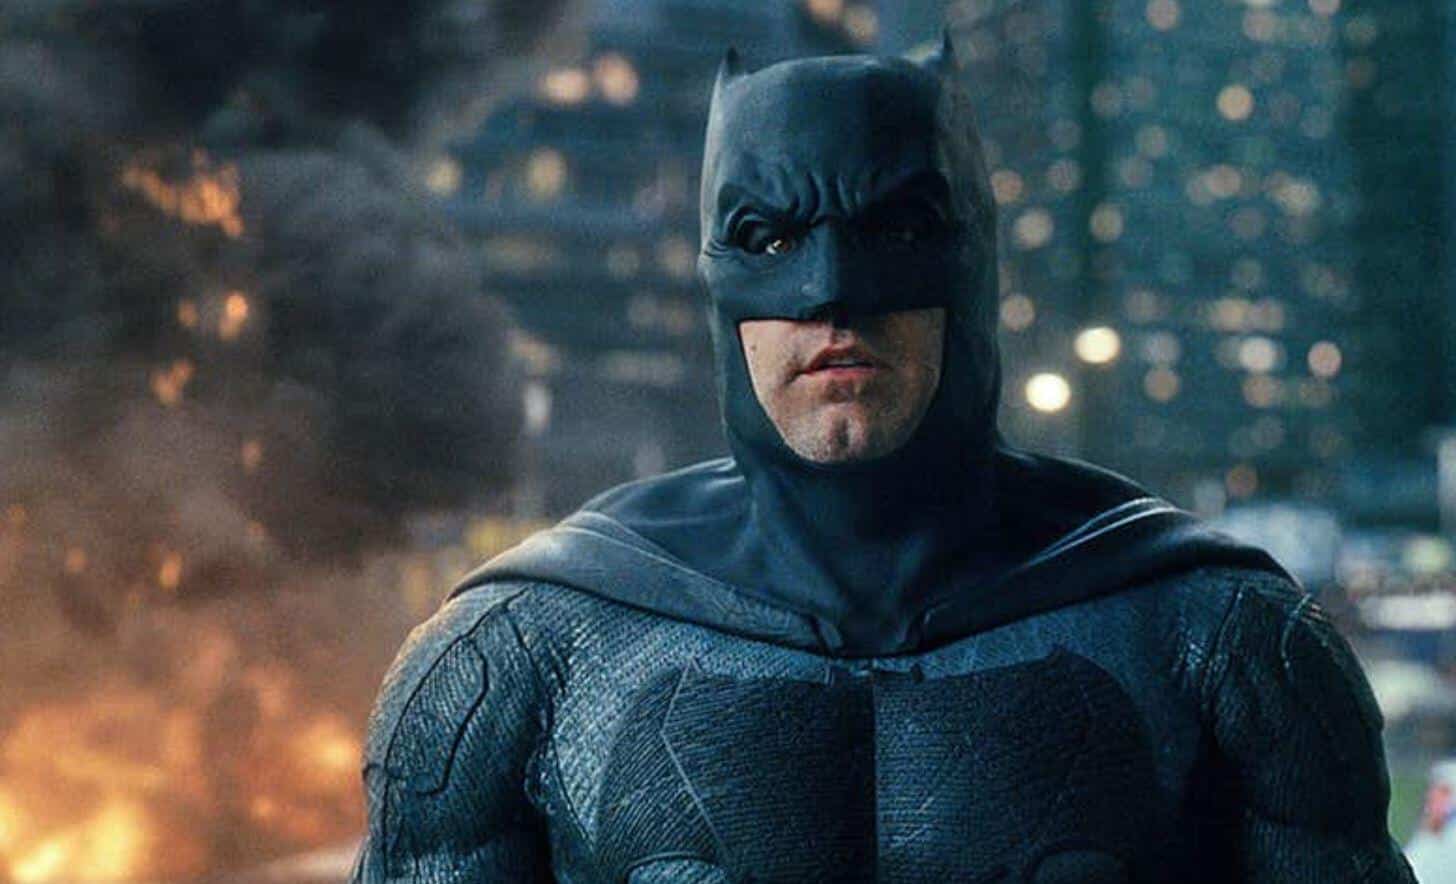 Official Odds For Ben Affleck's Batman Replacement Actor Revealed